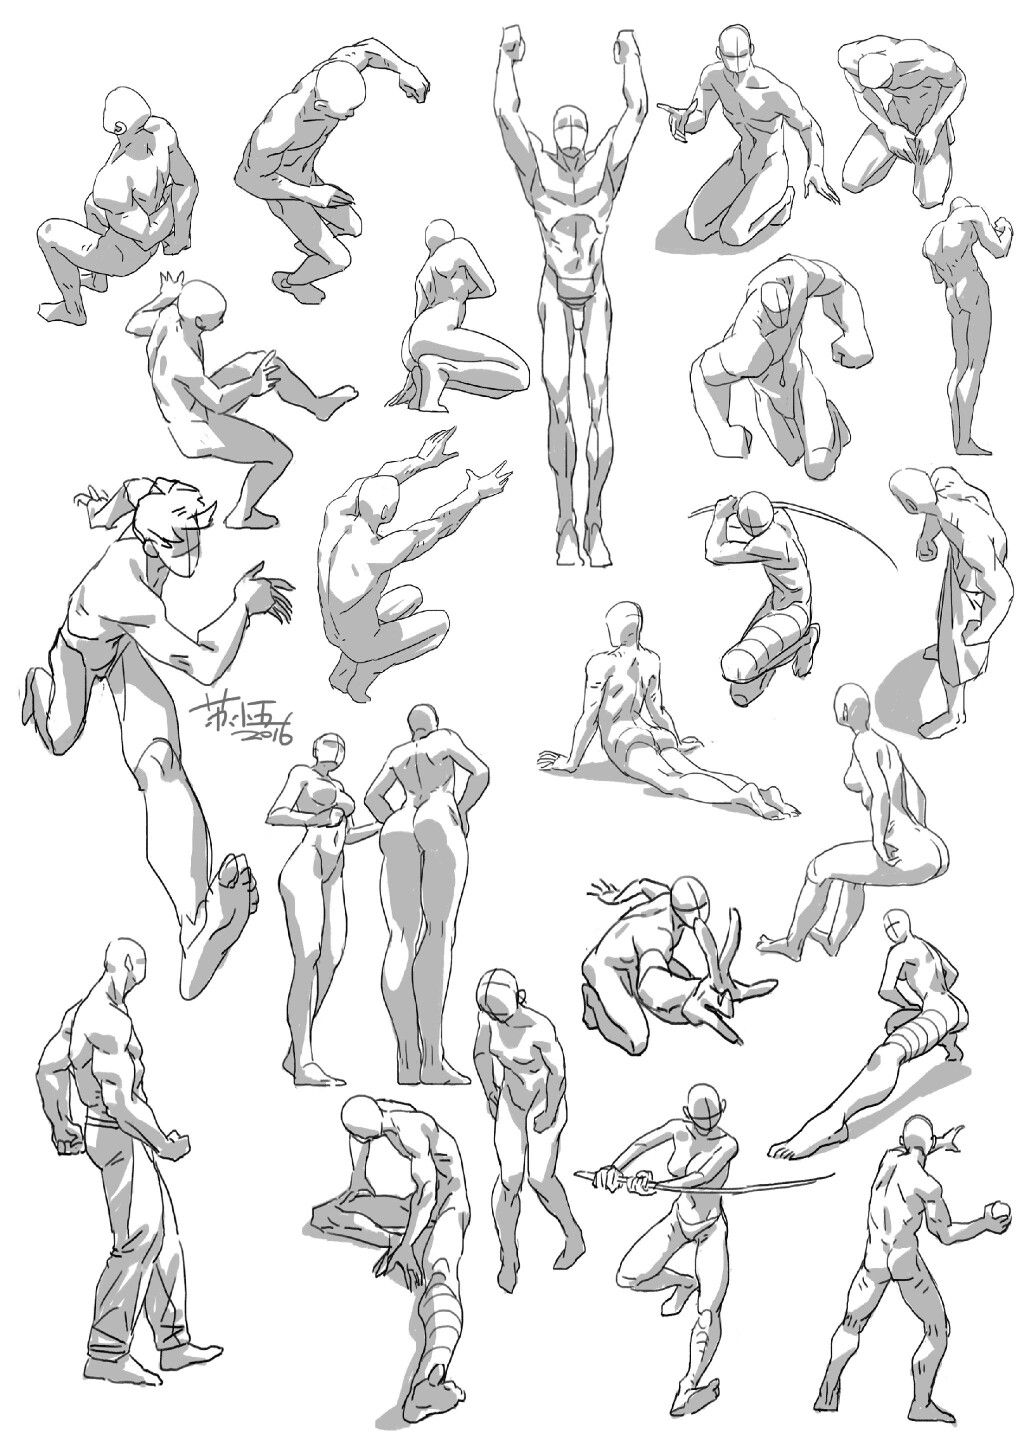 The GEEK TOWER - Action poses reference / Referencia poses... | Facebook